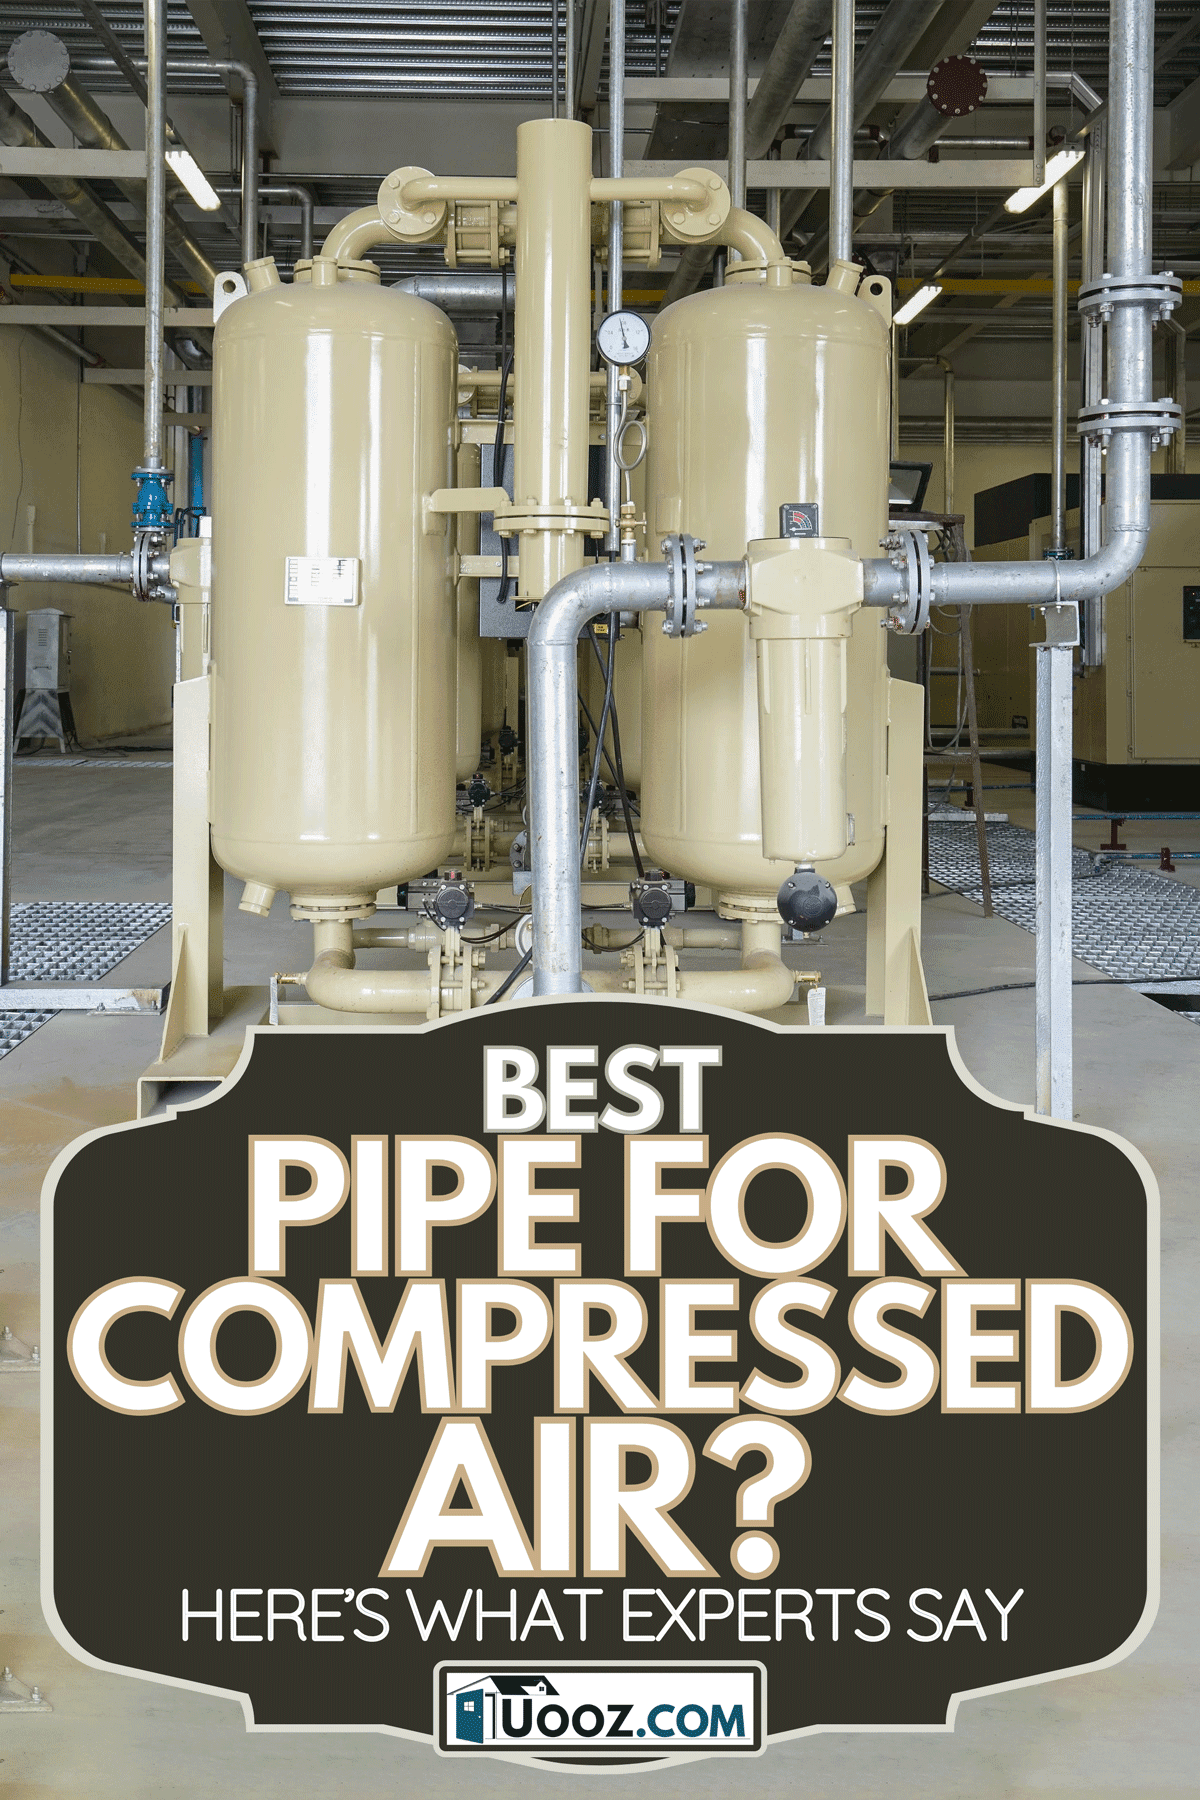 An industrial air compressor systems with equipment machinery, Best Pipe For Compressed Air? Here’s What Experts Say